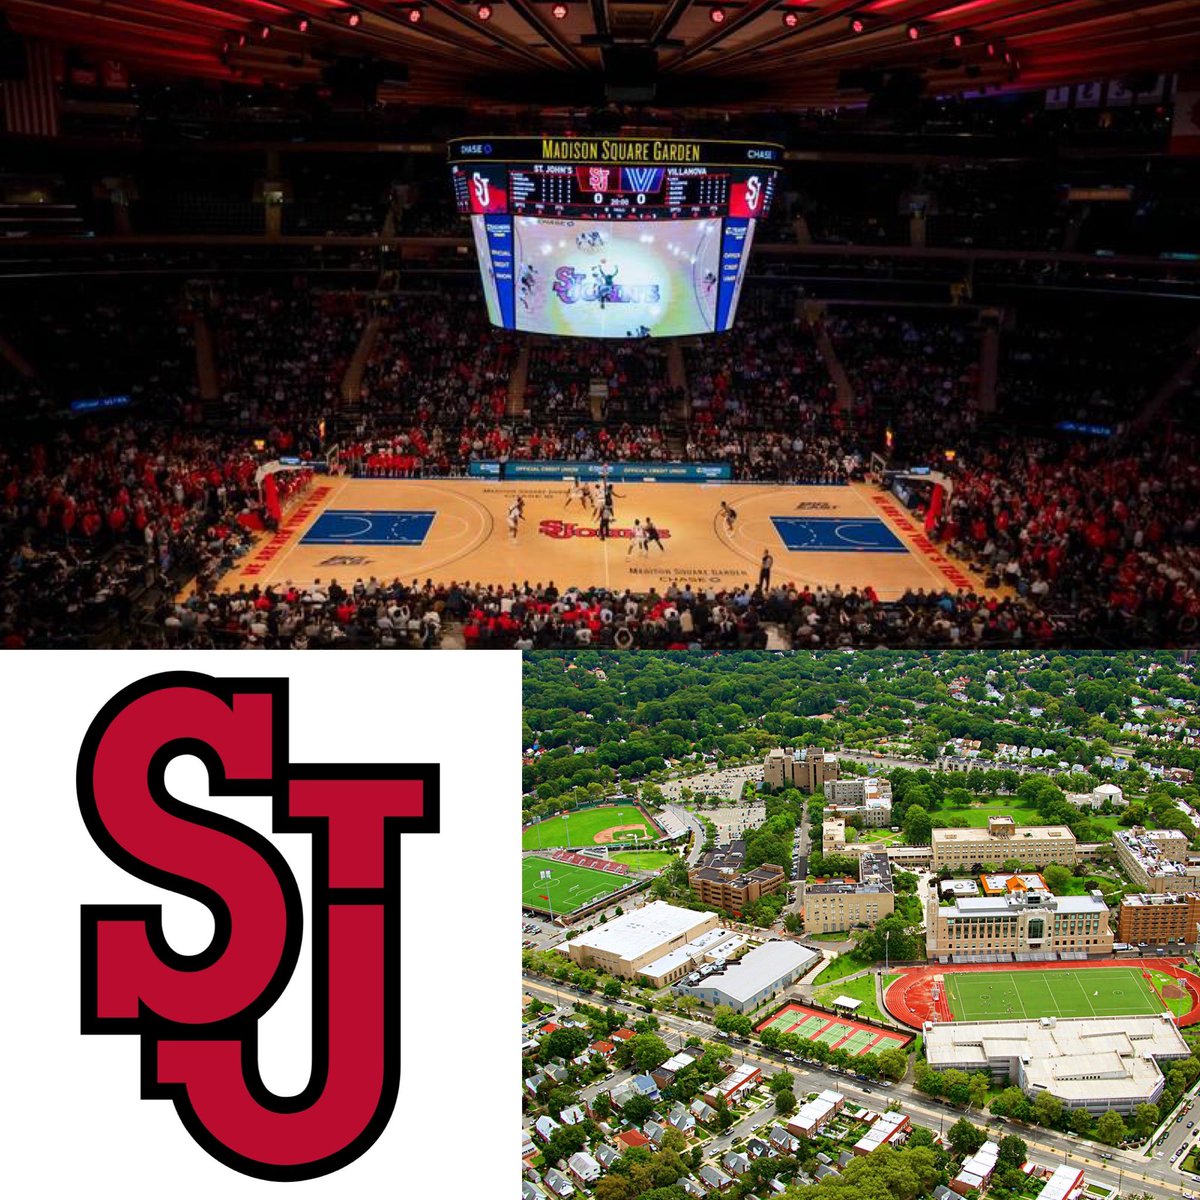 After a great talk with Coach Pitino, I’m blessed to receive an offer from St. John’s University! #sjubb #BigEast